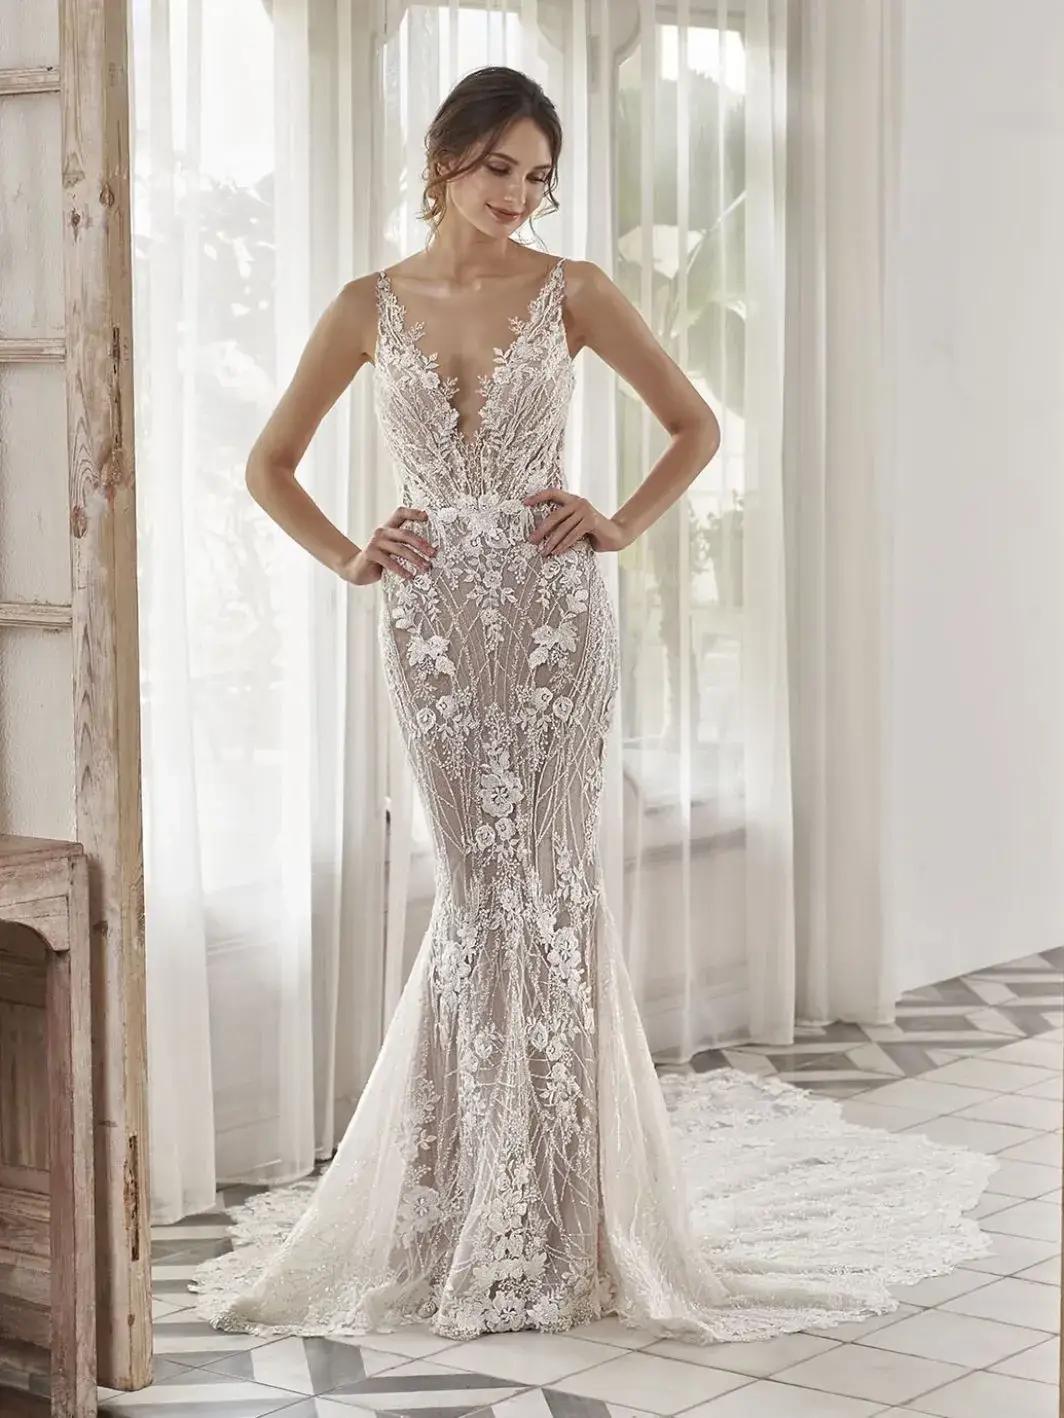 Dare To Be Unique: Amazing Bridal Gowns We Choose For YOU Image